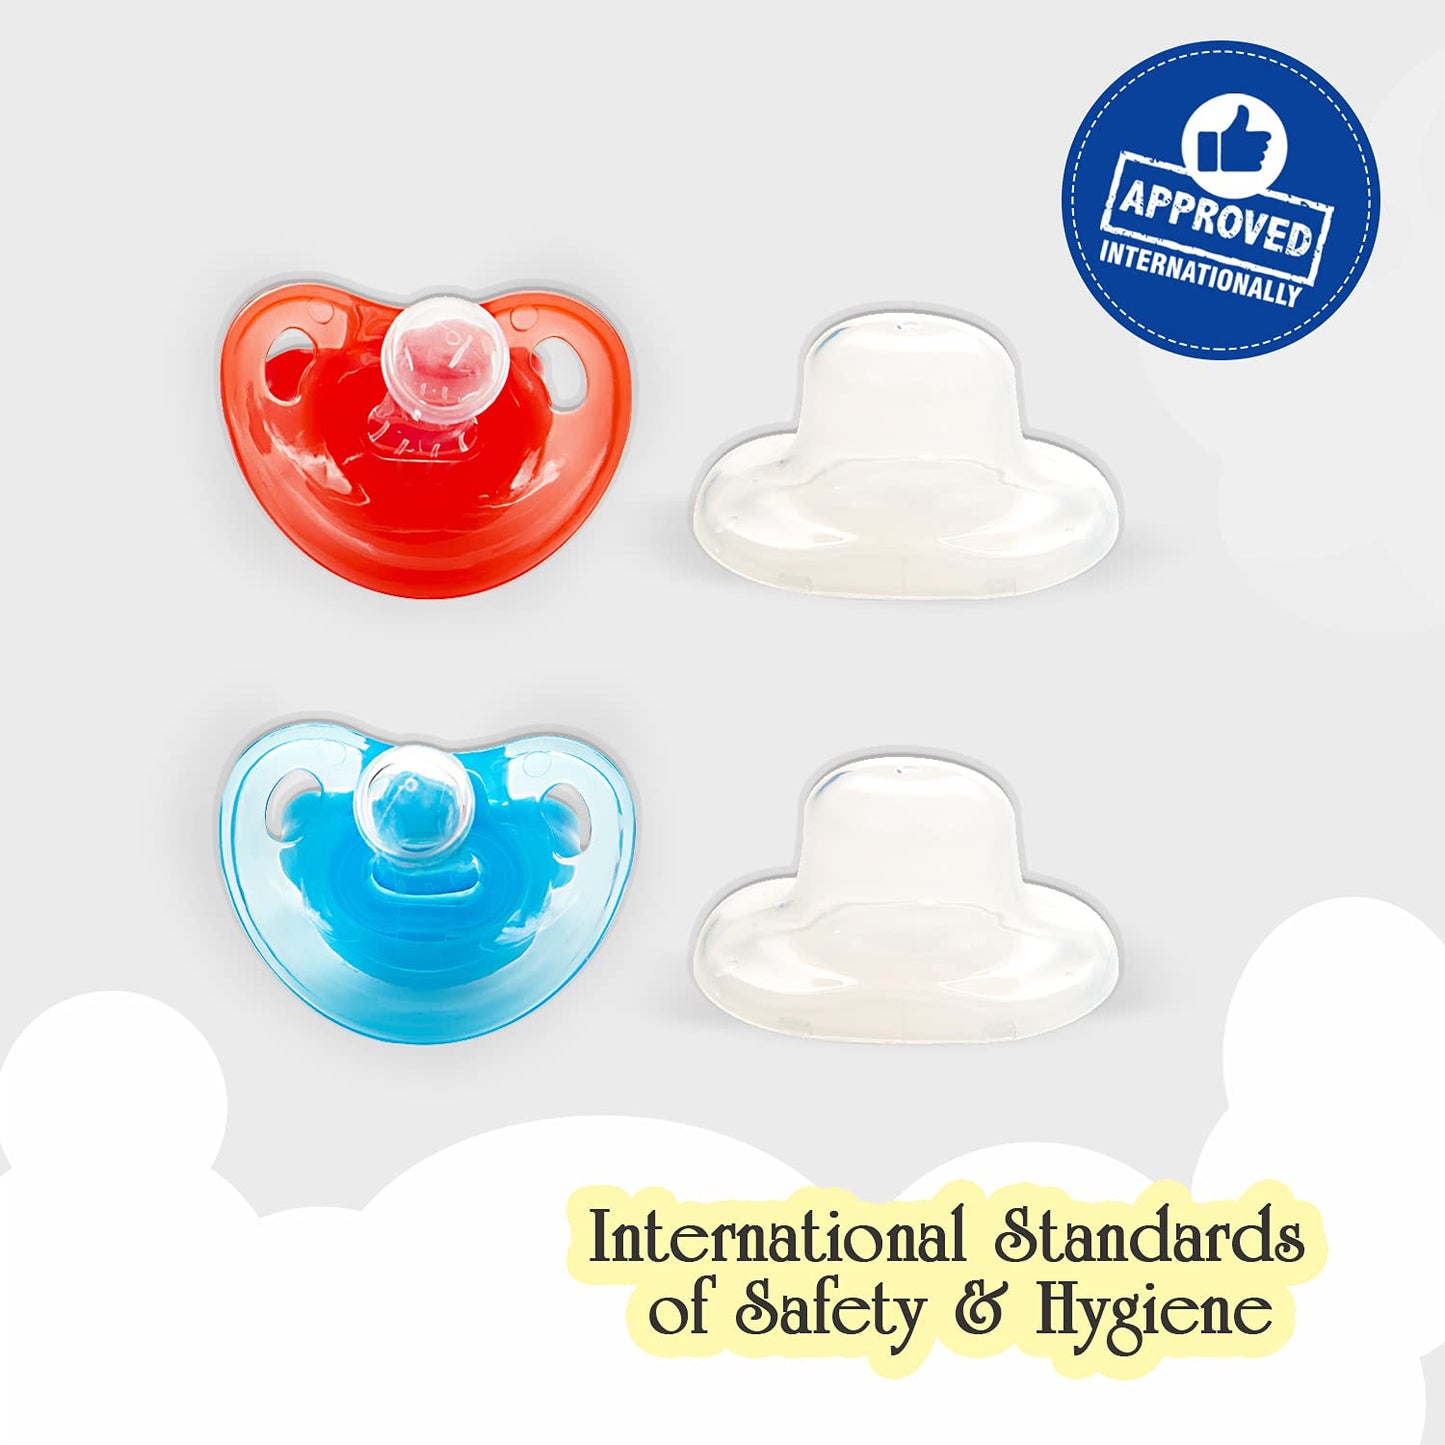 Mee Mee Baby Pacifier Ultra Light Soft Silicone Nipple For 0-6 months + Kids (Blue, Red) - Pack of 2